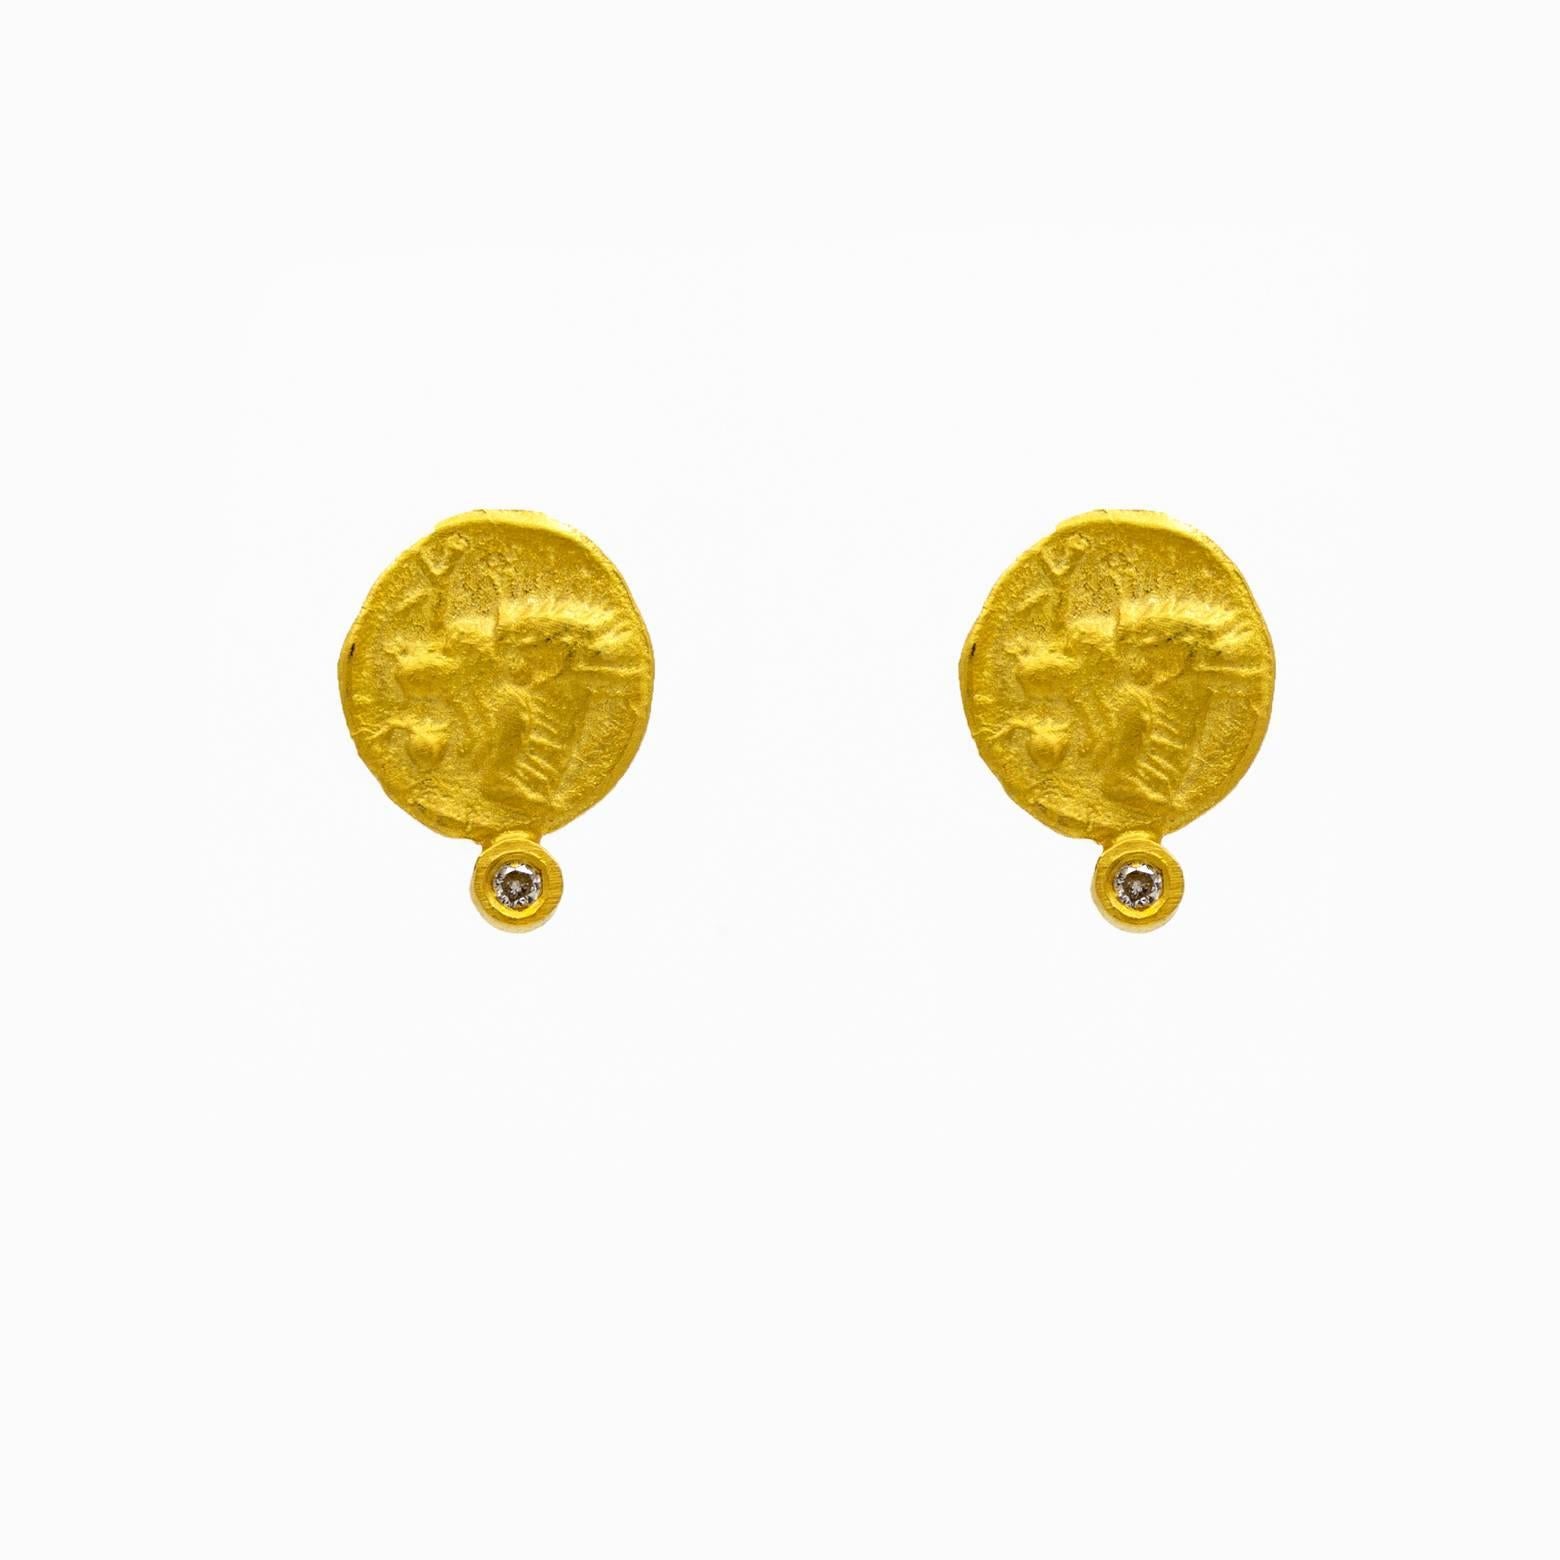 The stamp on these coin and diamond earrings resemble some sort of mythical feline creature- almost like a lion or a leopard. Exquisitely detailed the texture is divine- like a rich creamy satin matte. The total weight on the diamonds in both